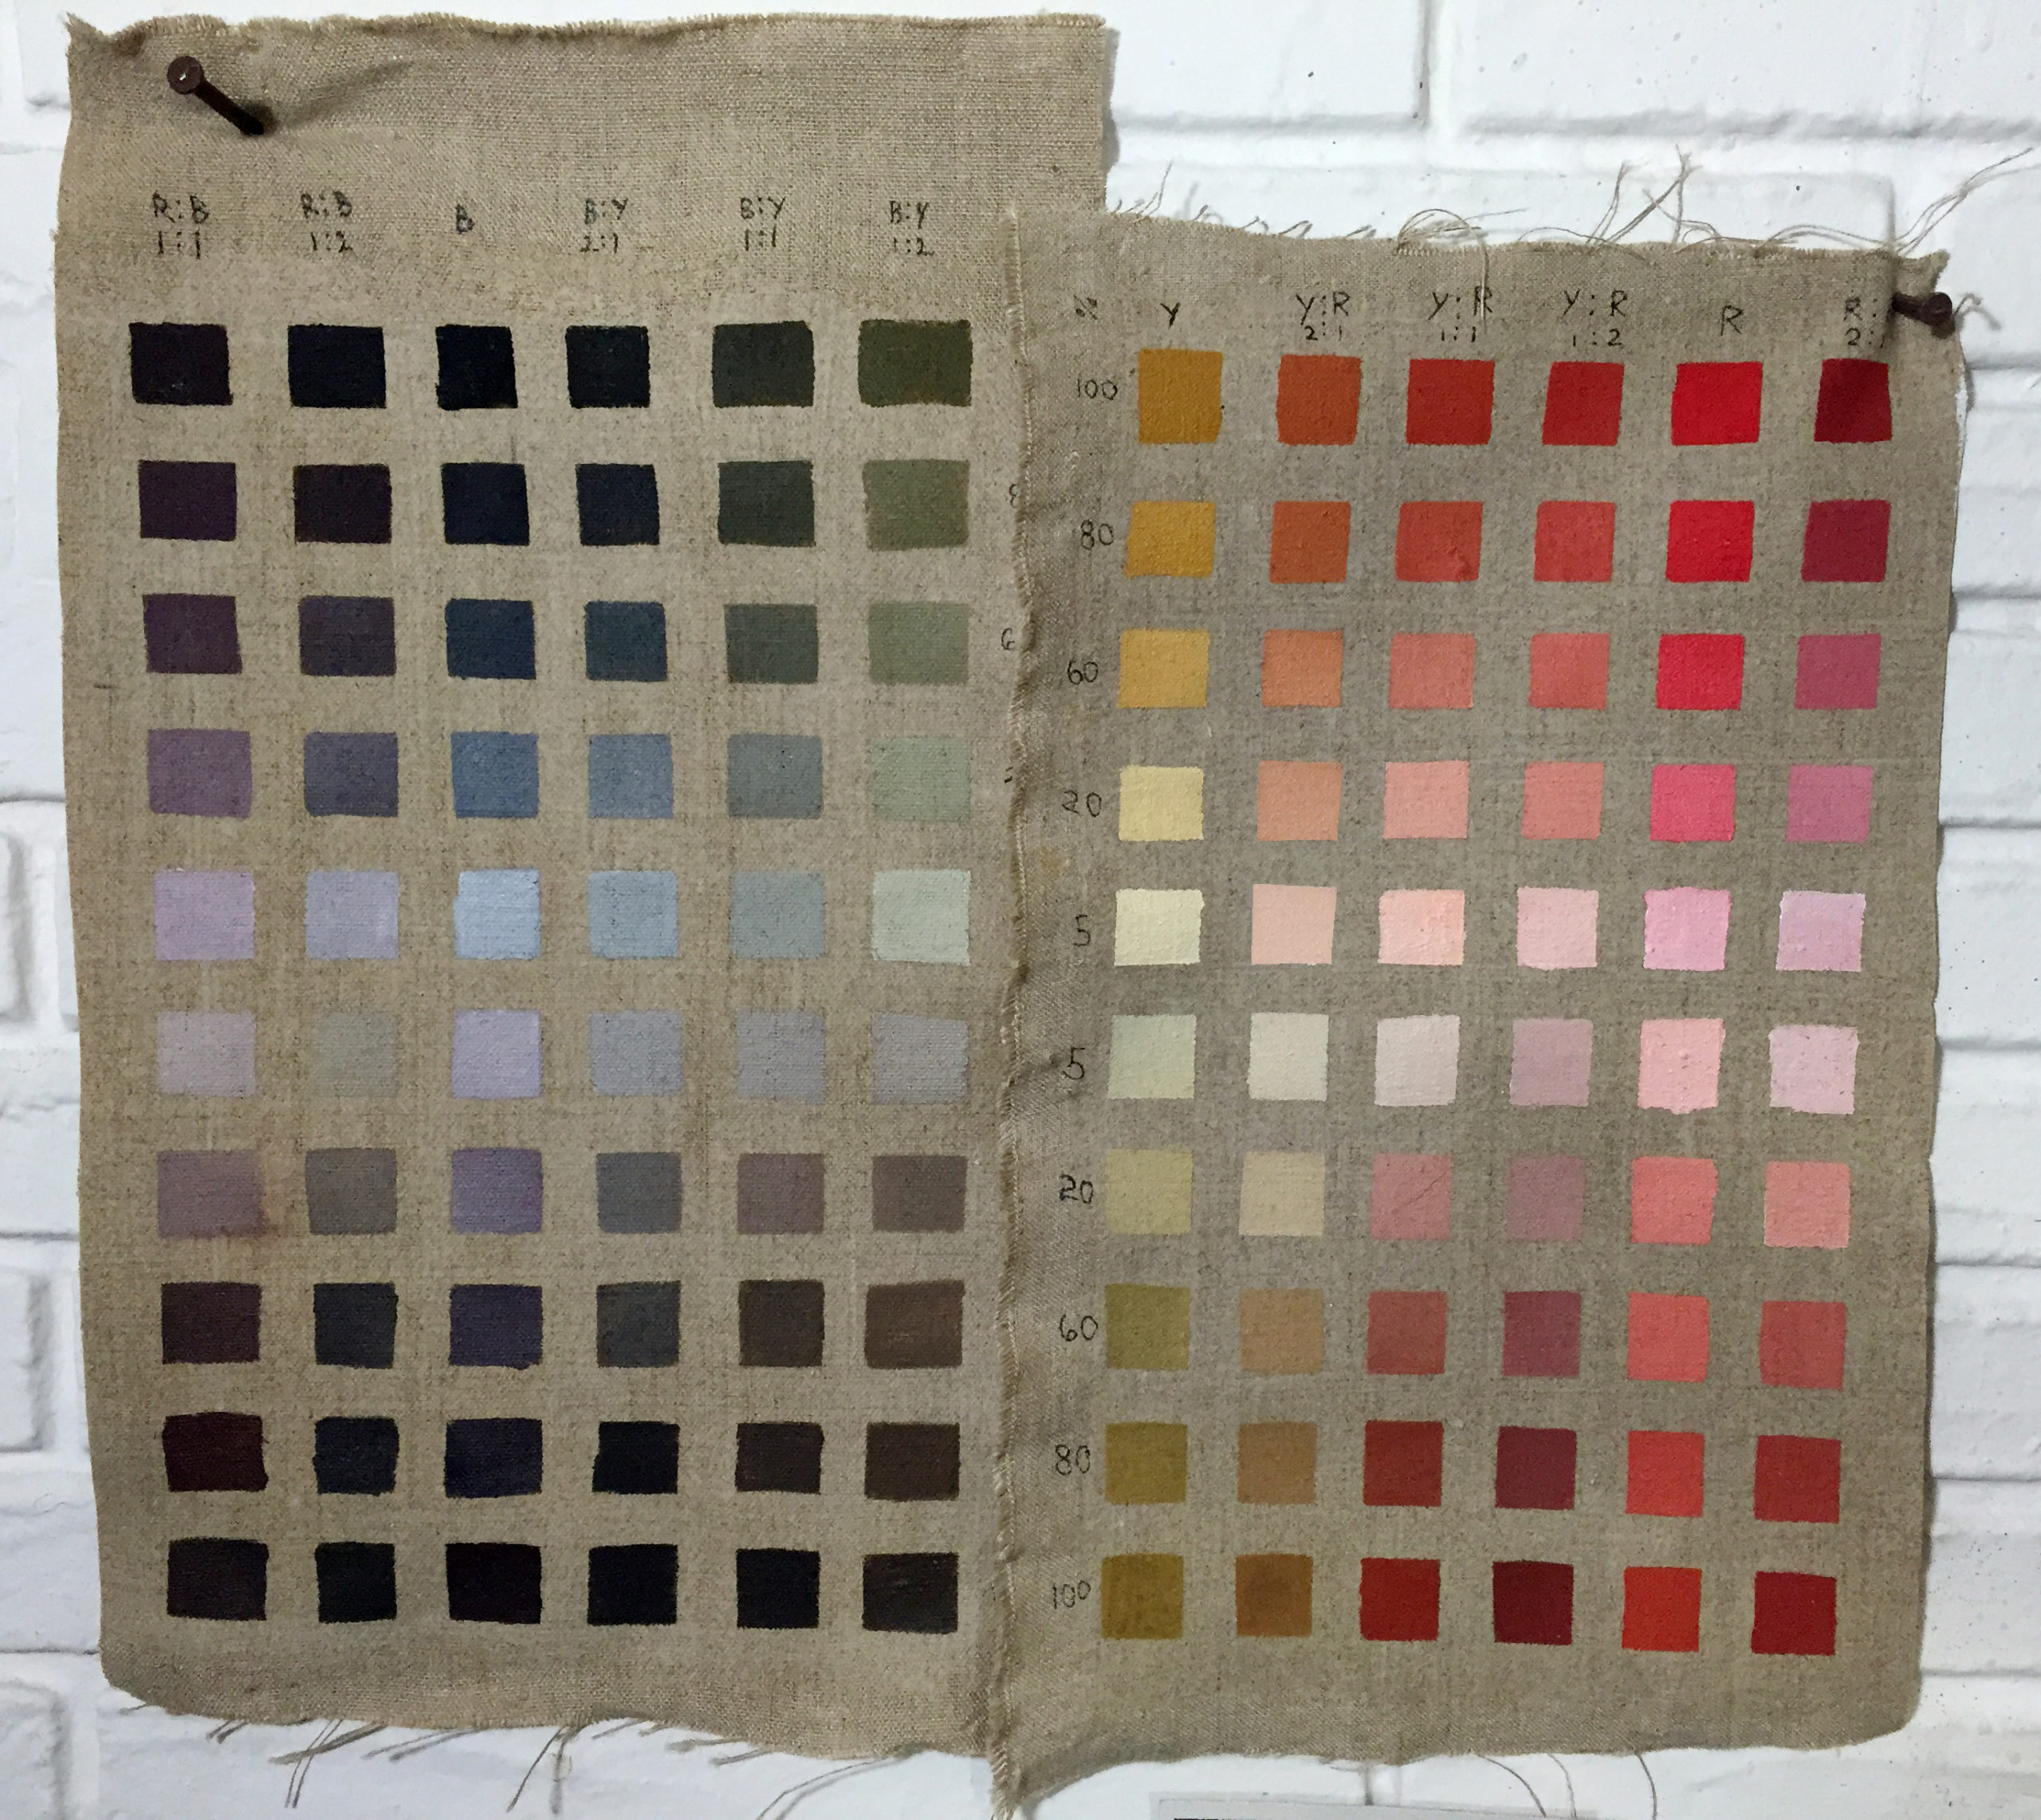 Zorn palette - Color swatches for painting art